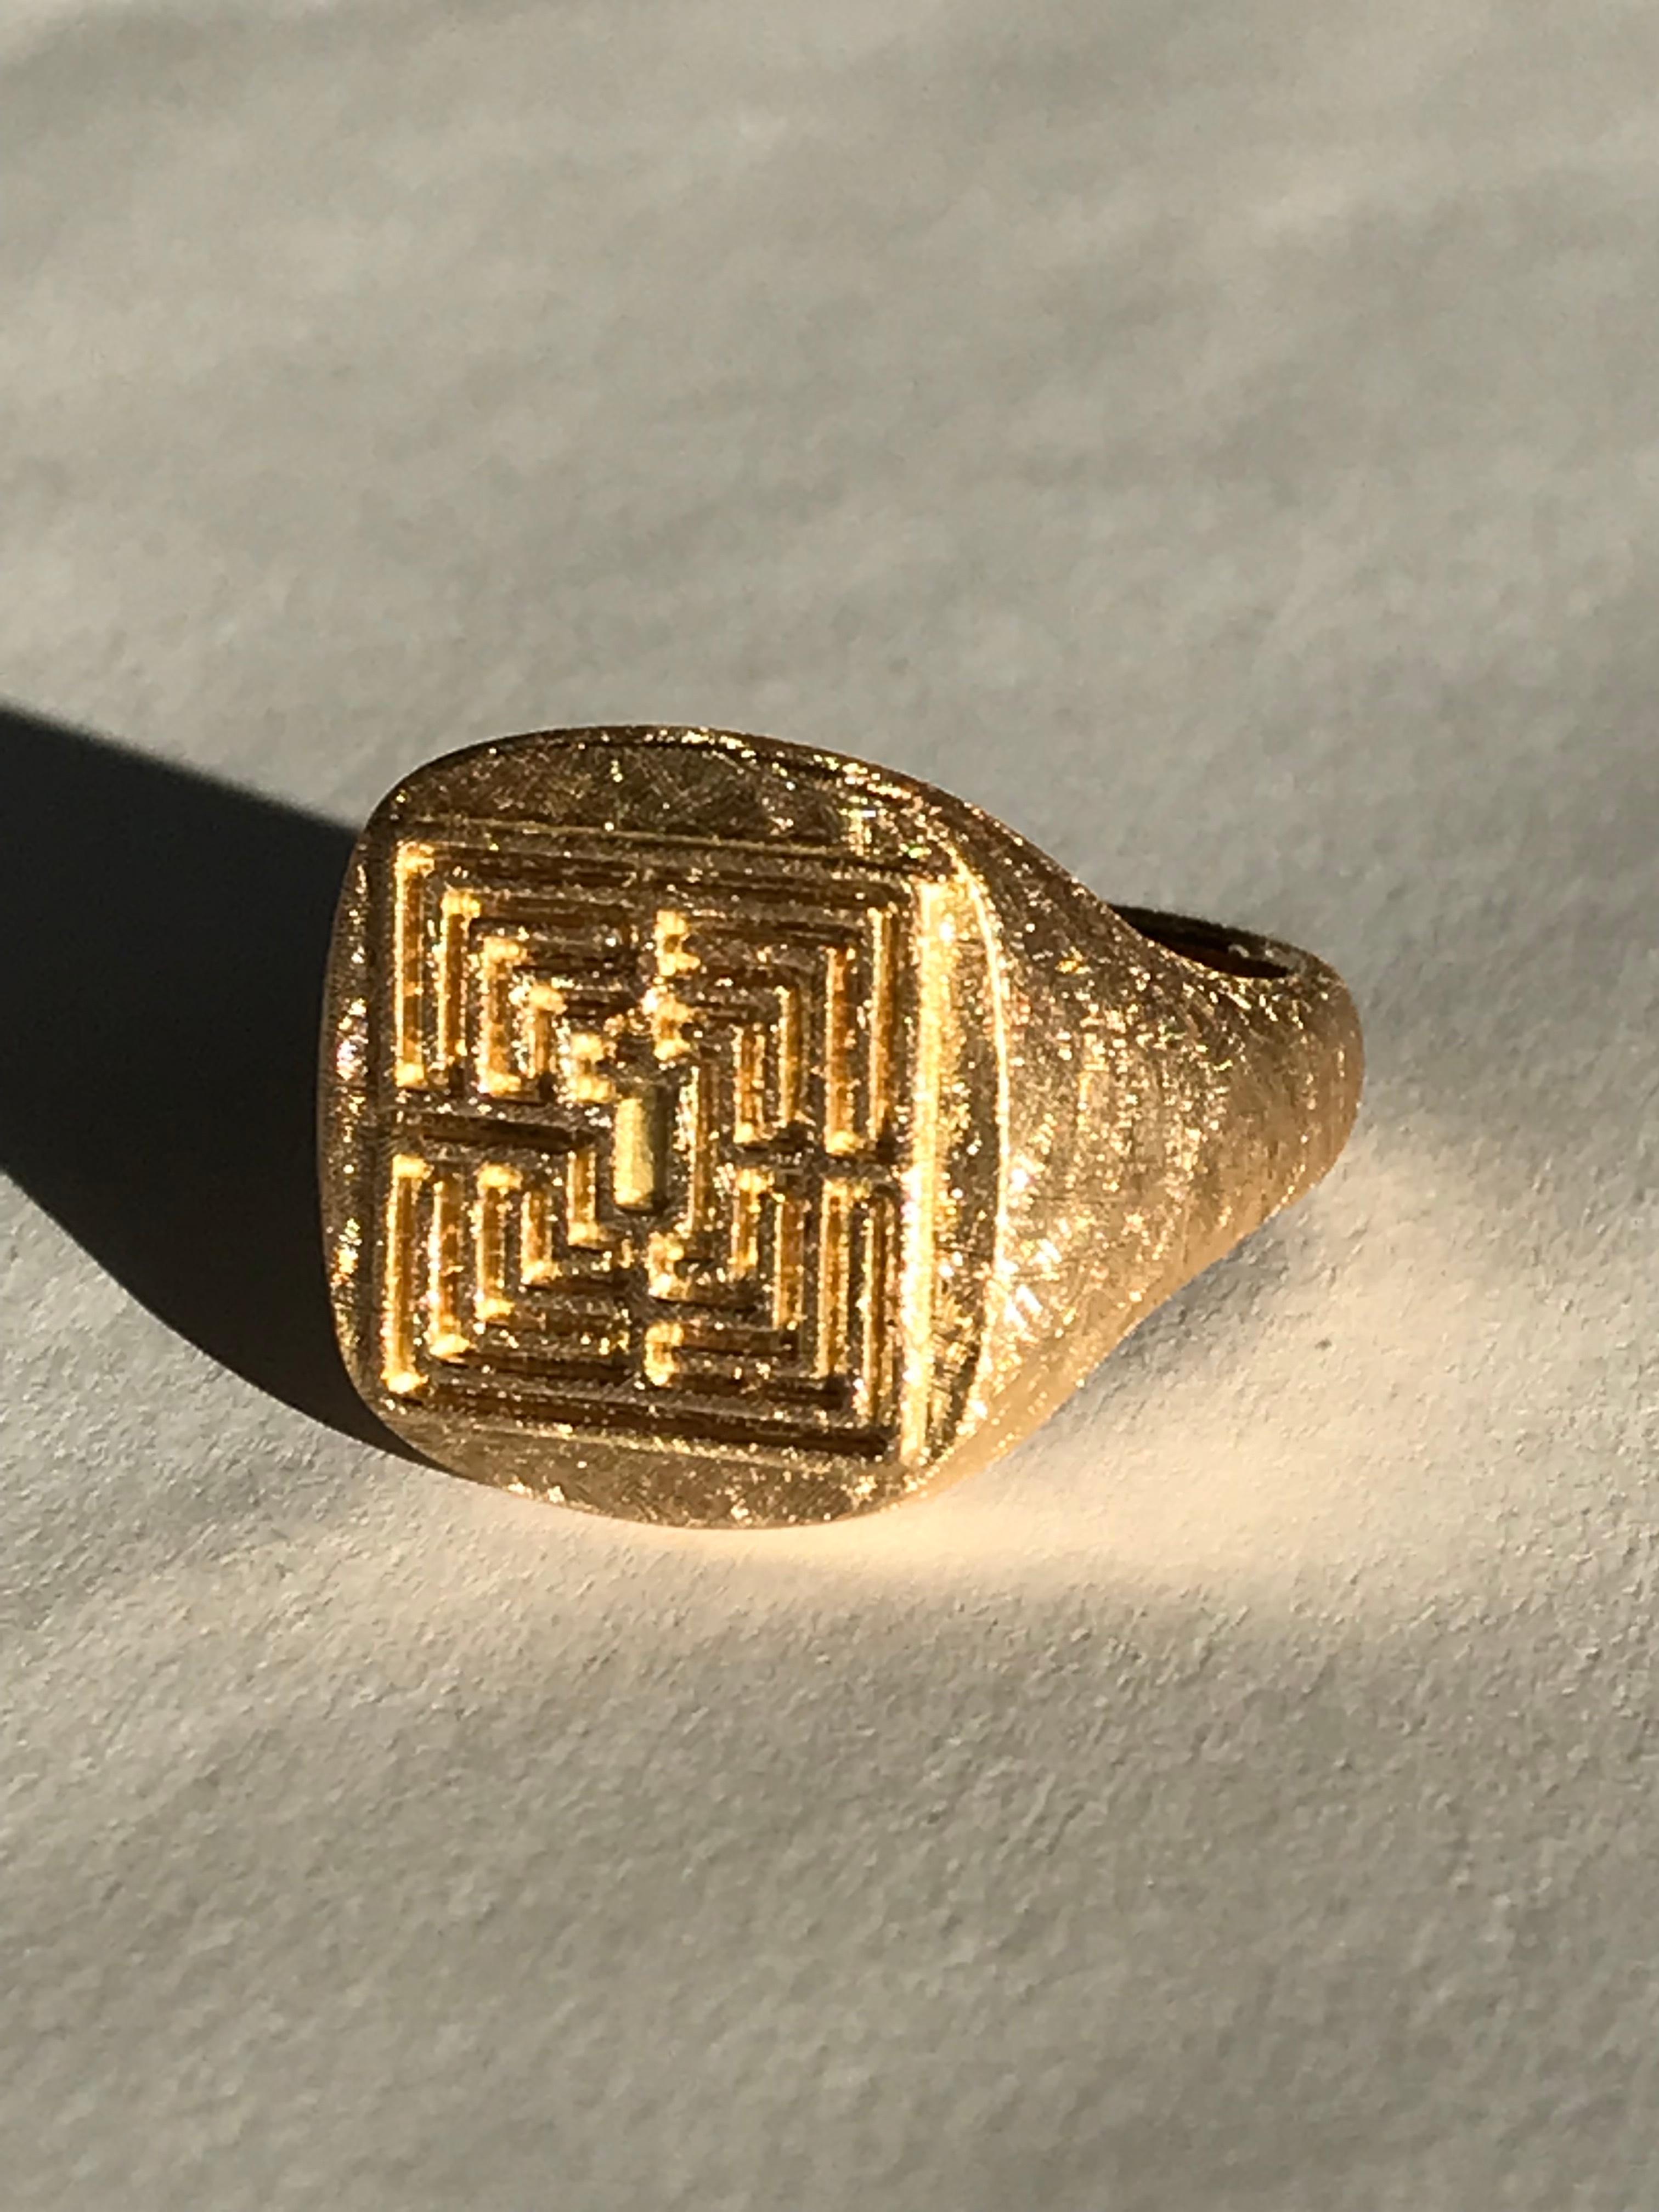 Dalben design 18k solid yellow gold scratch finishing signet ring with a labyrinth engraved . 
Top dimensions :
height 15,5 mm
width 14,5 mm
This ring requires 3-4 weeks from order to be custom-made .
The ring has been designed and handcrafted in